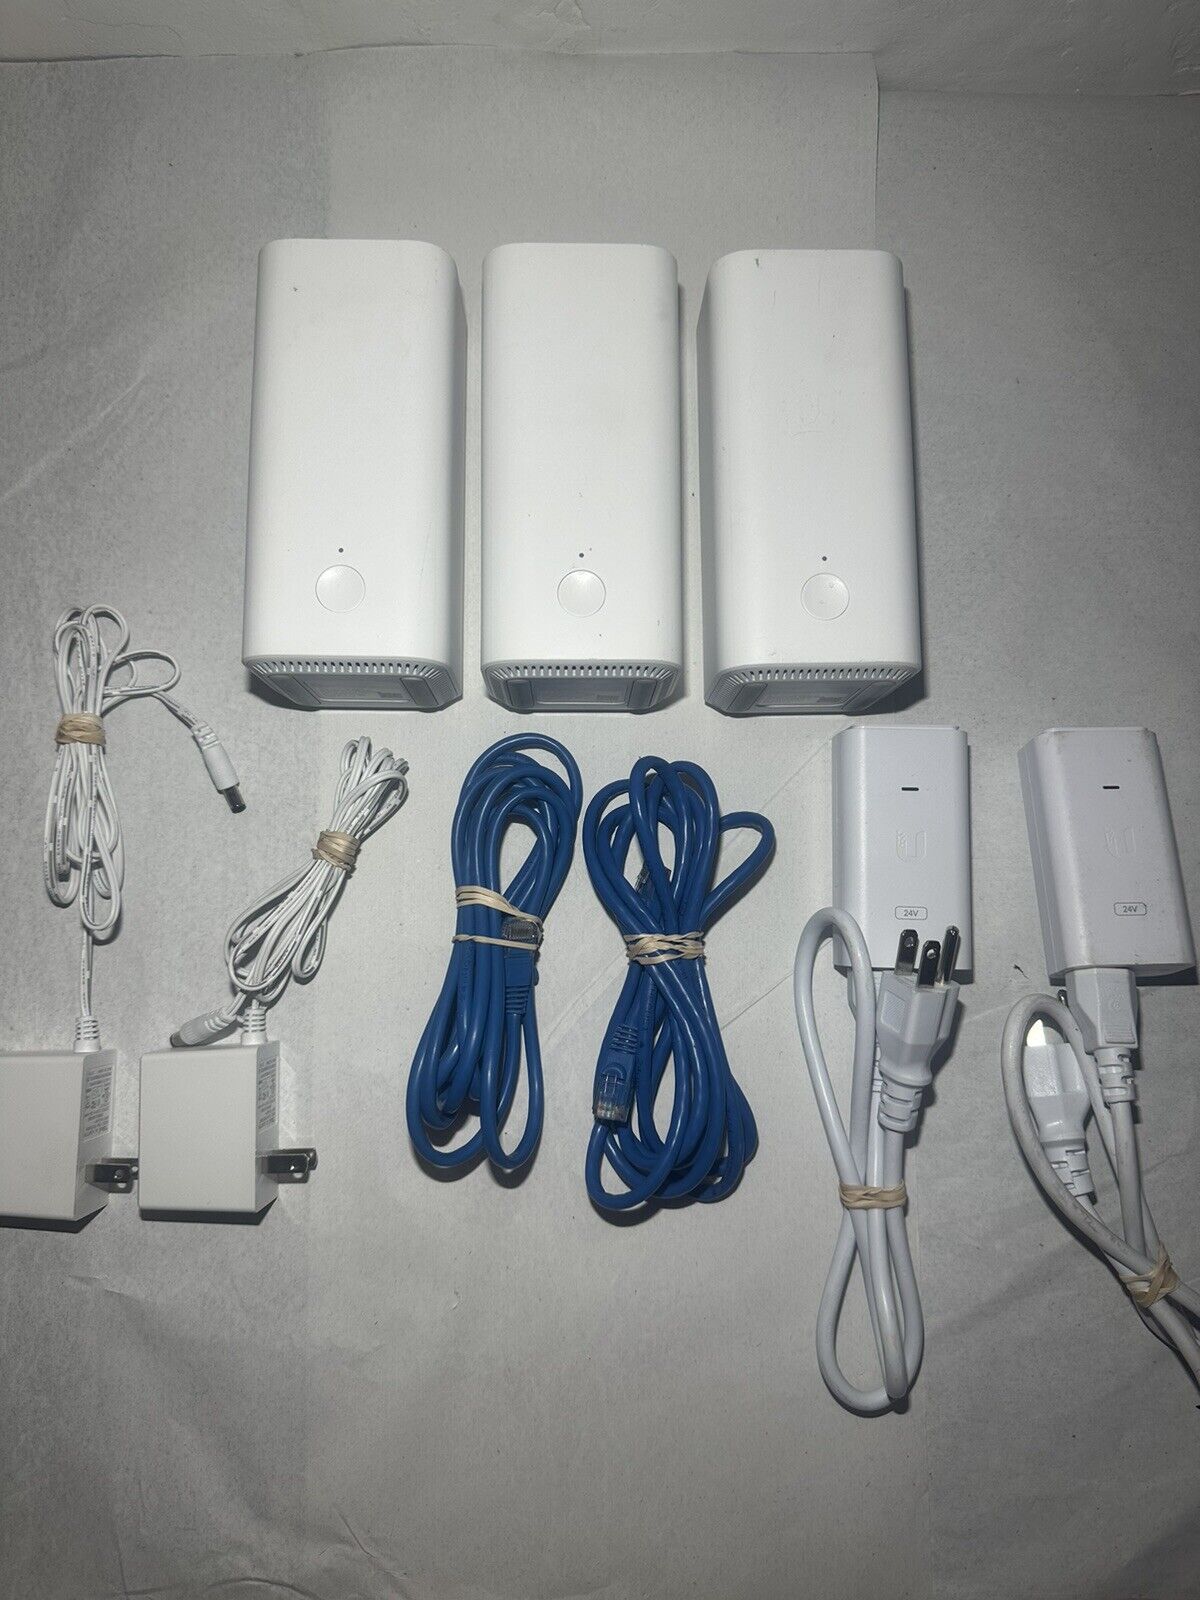 Vilo VLWF01 Mesh Wi-Fi System Dual Band AC1200 Up to 4,500 sqft 3 Pack Used